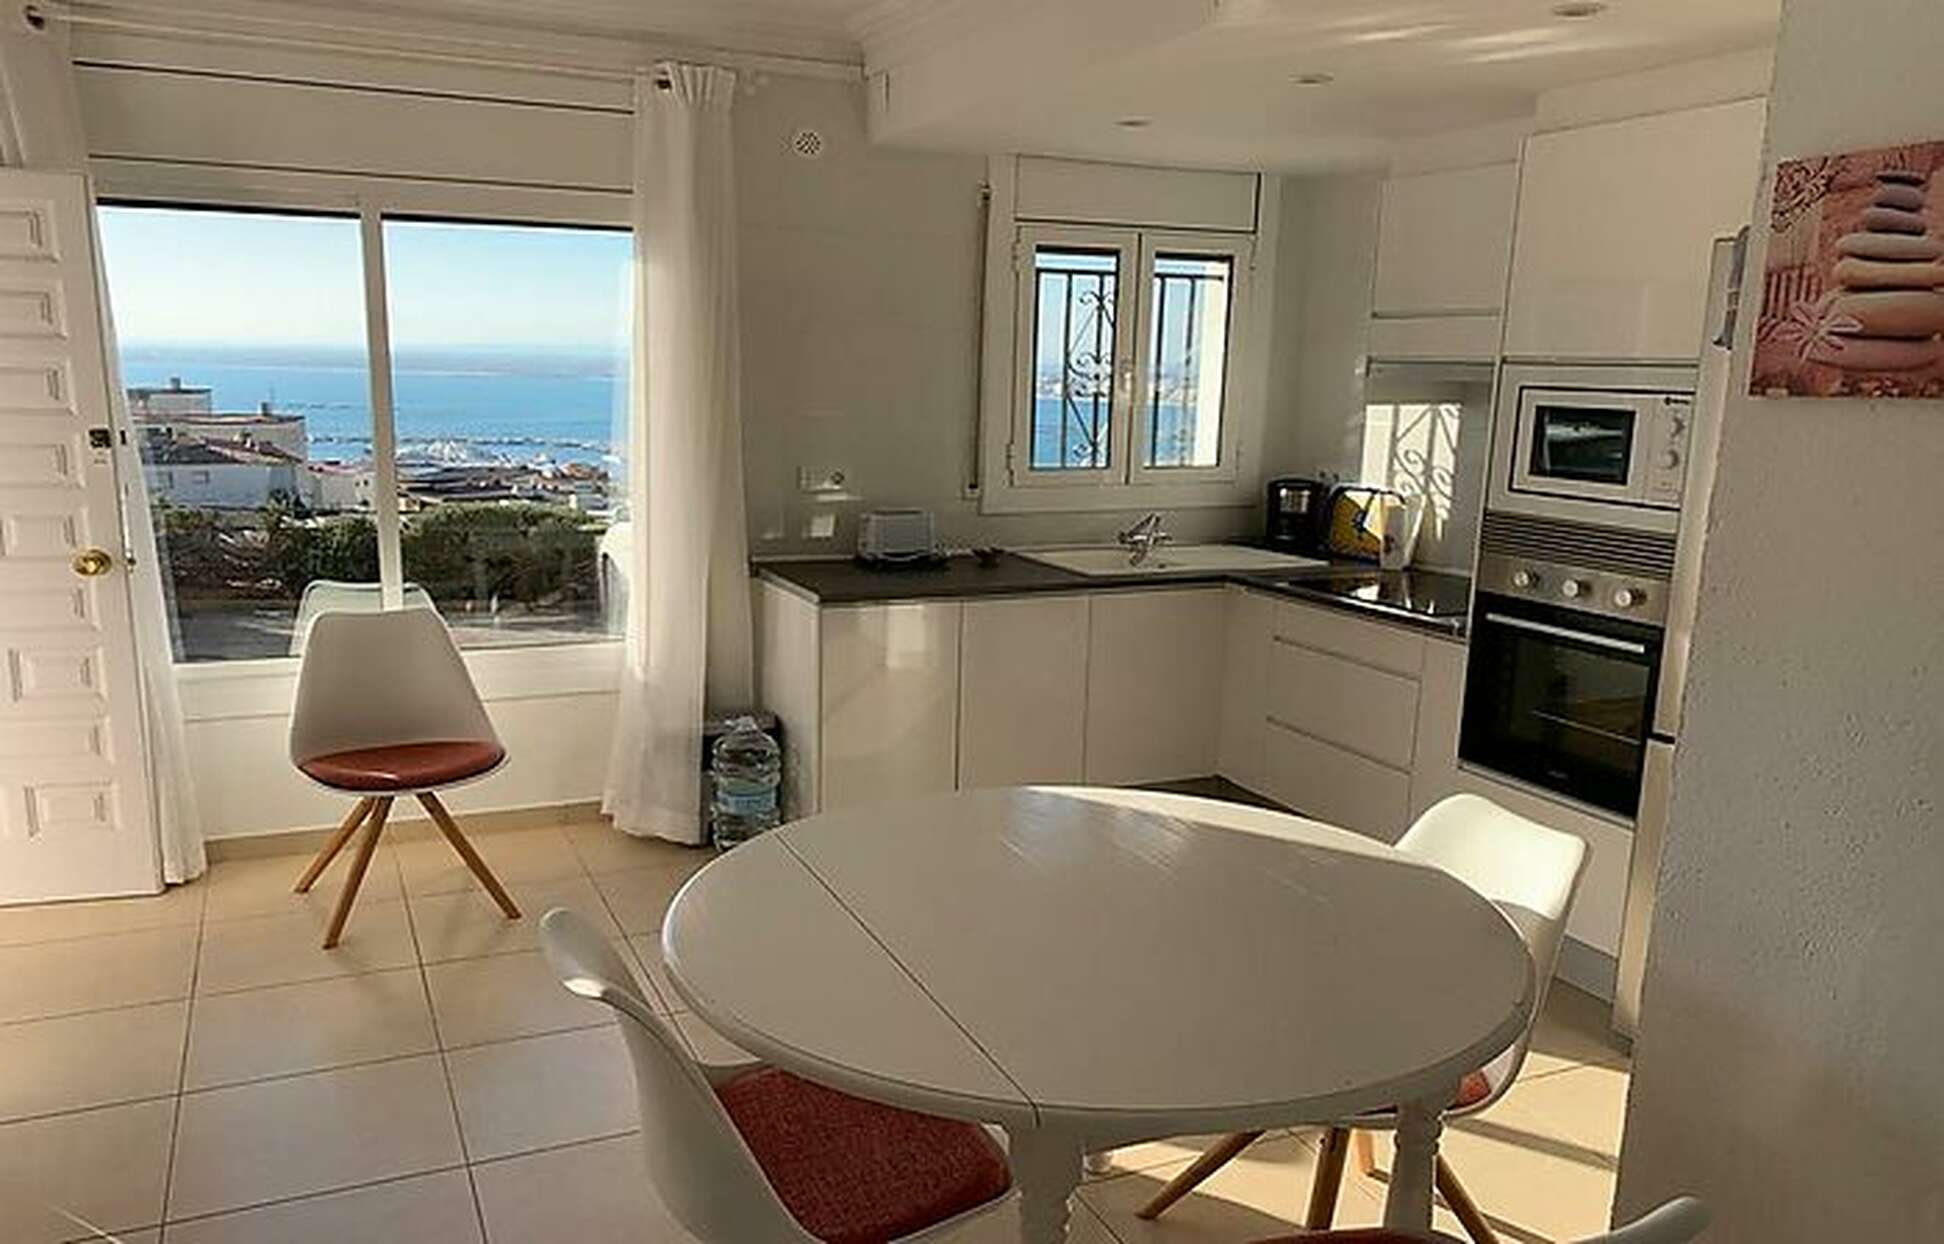 Magnificent flat with views over the bay of Roses.